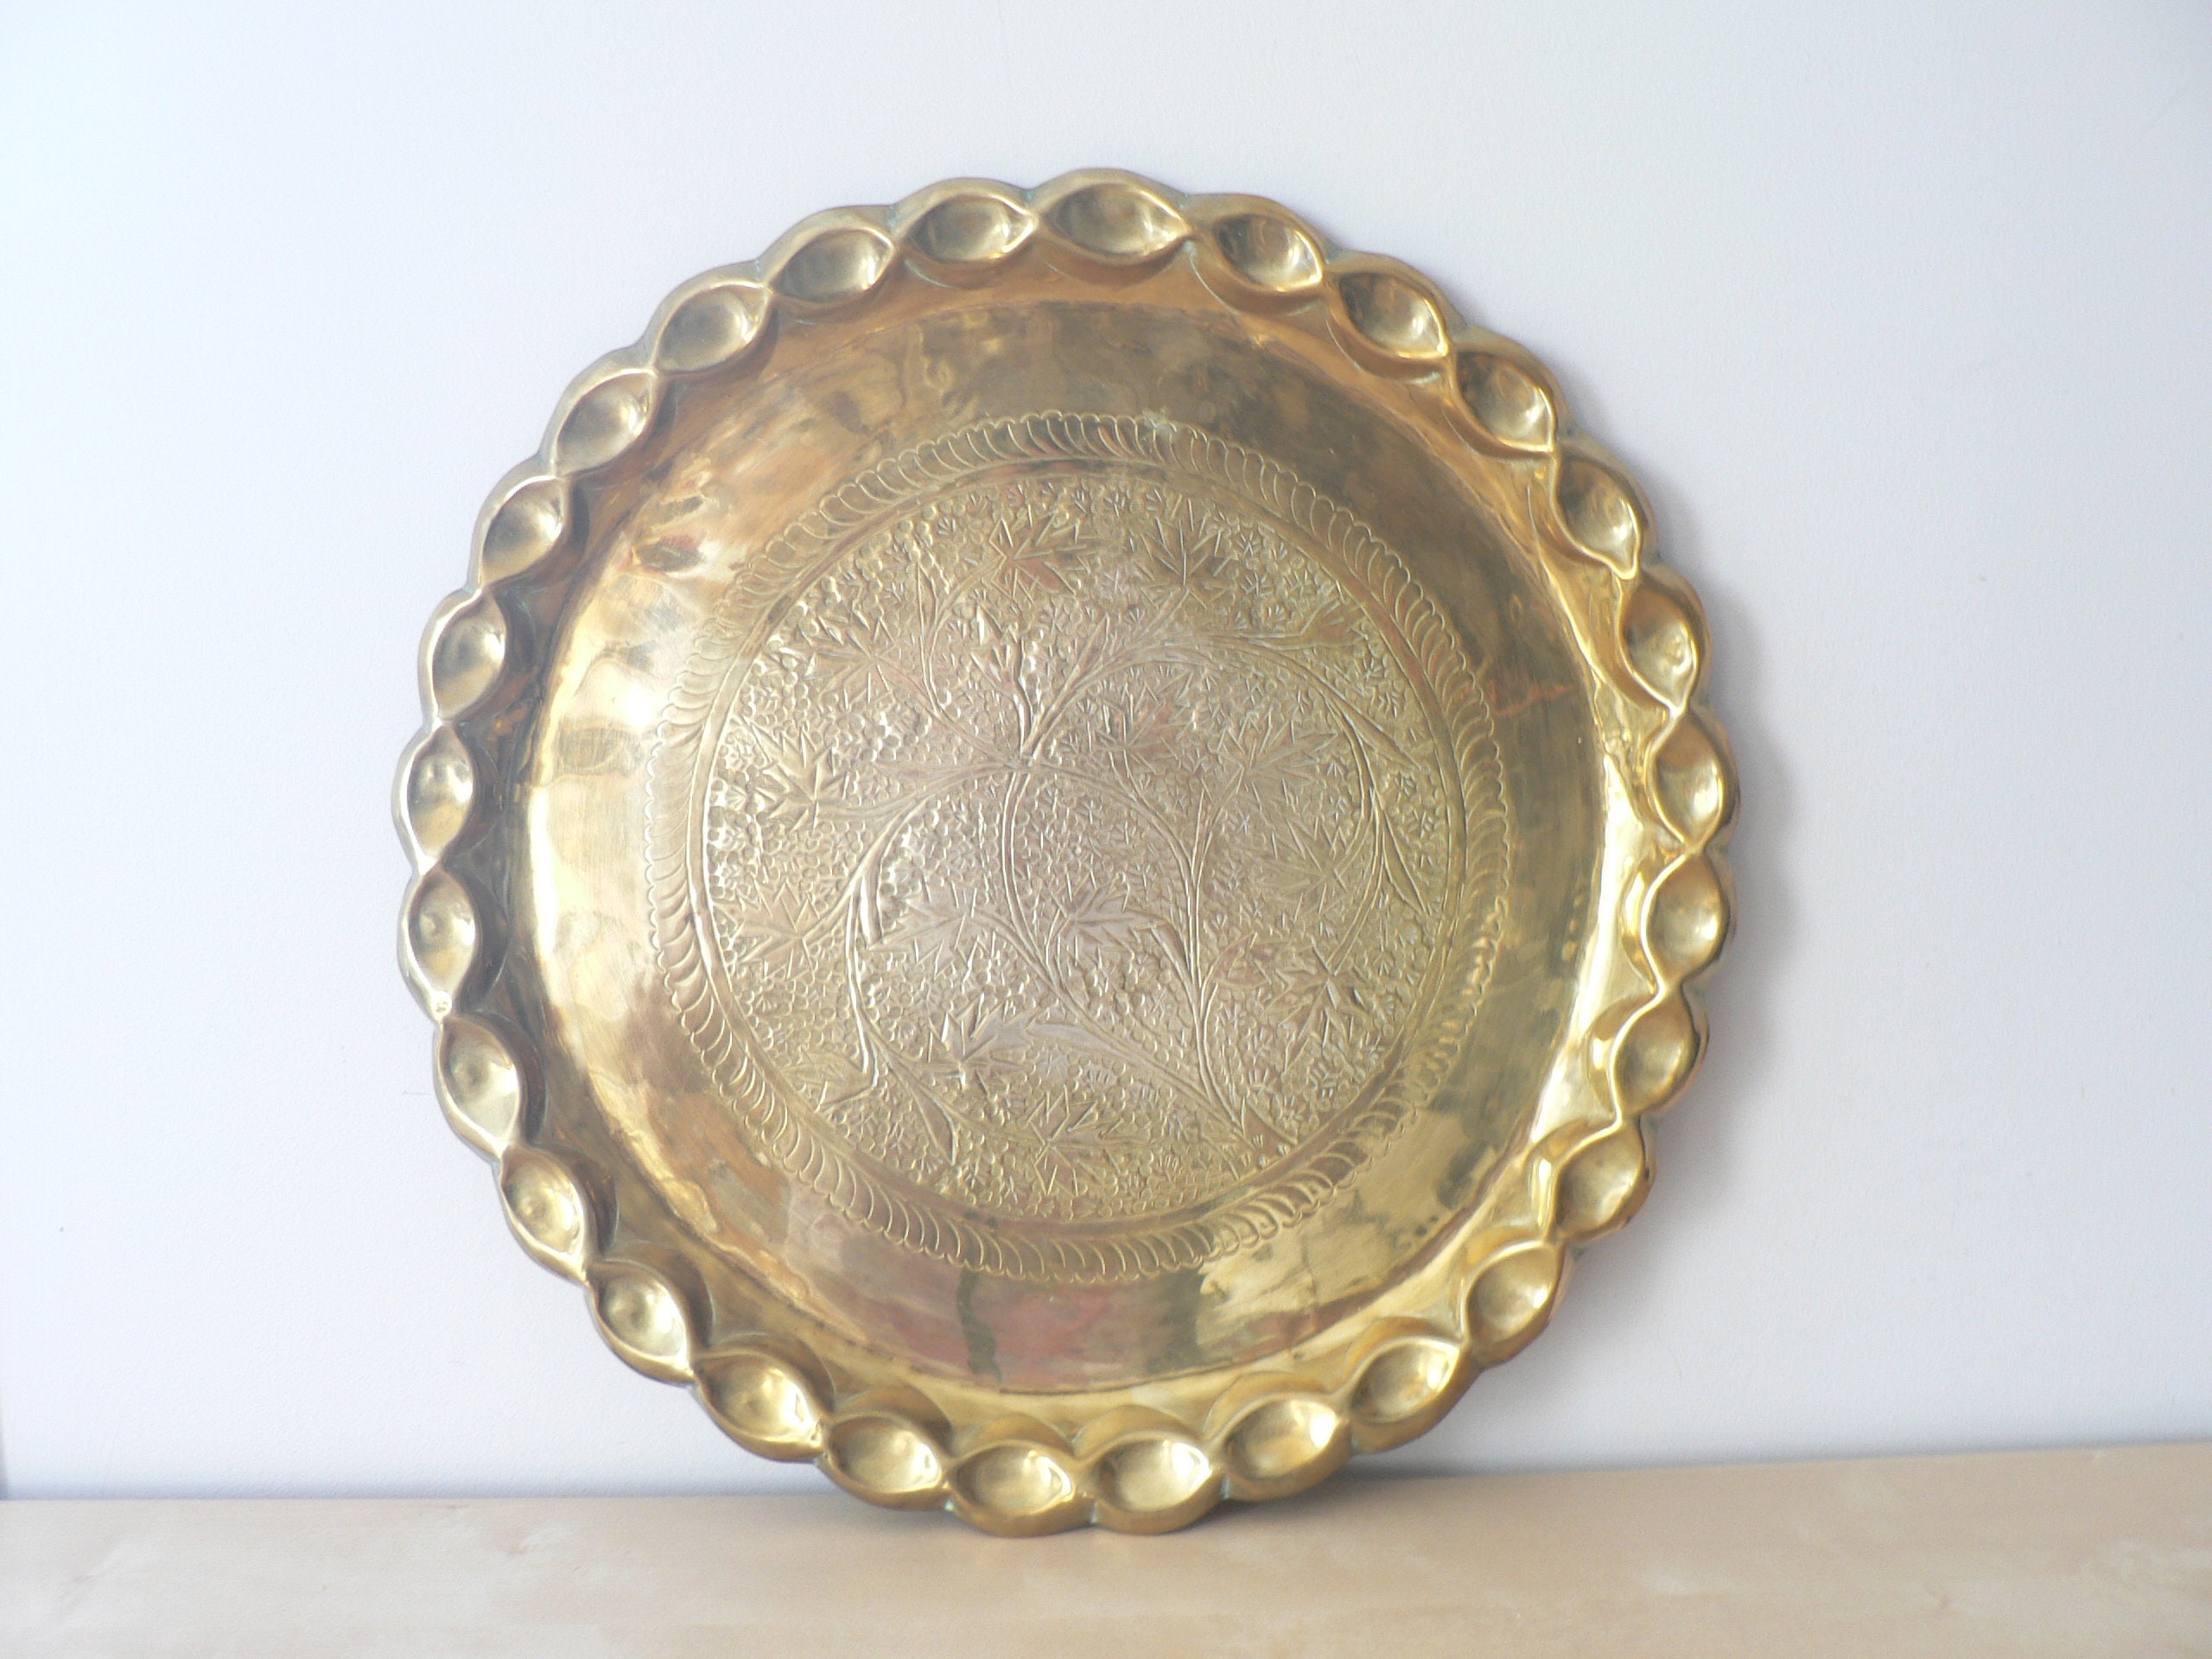 Buy 15 Hand Hammered Brass Tray With an Etched Design Online in India 